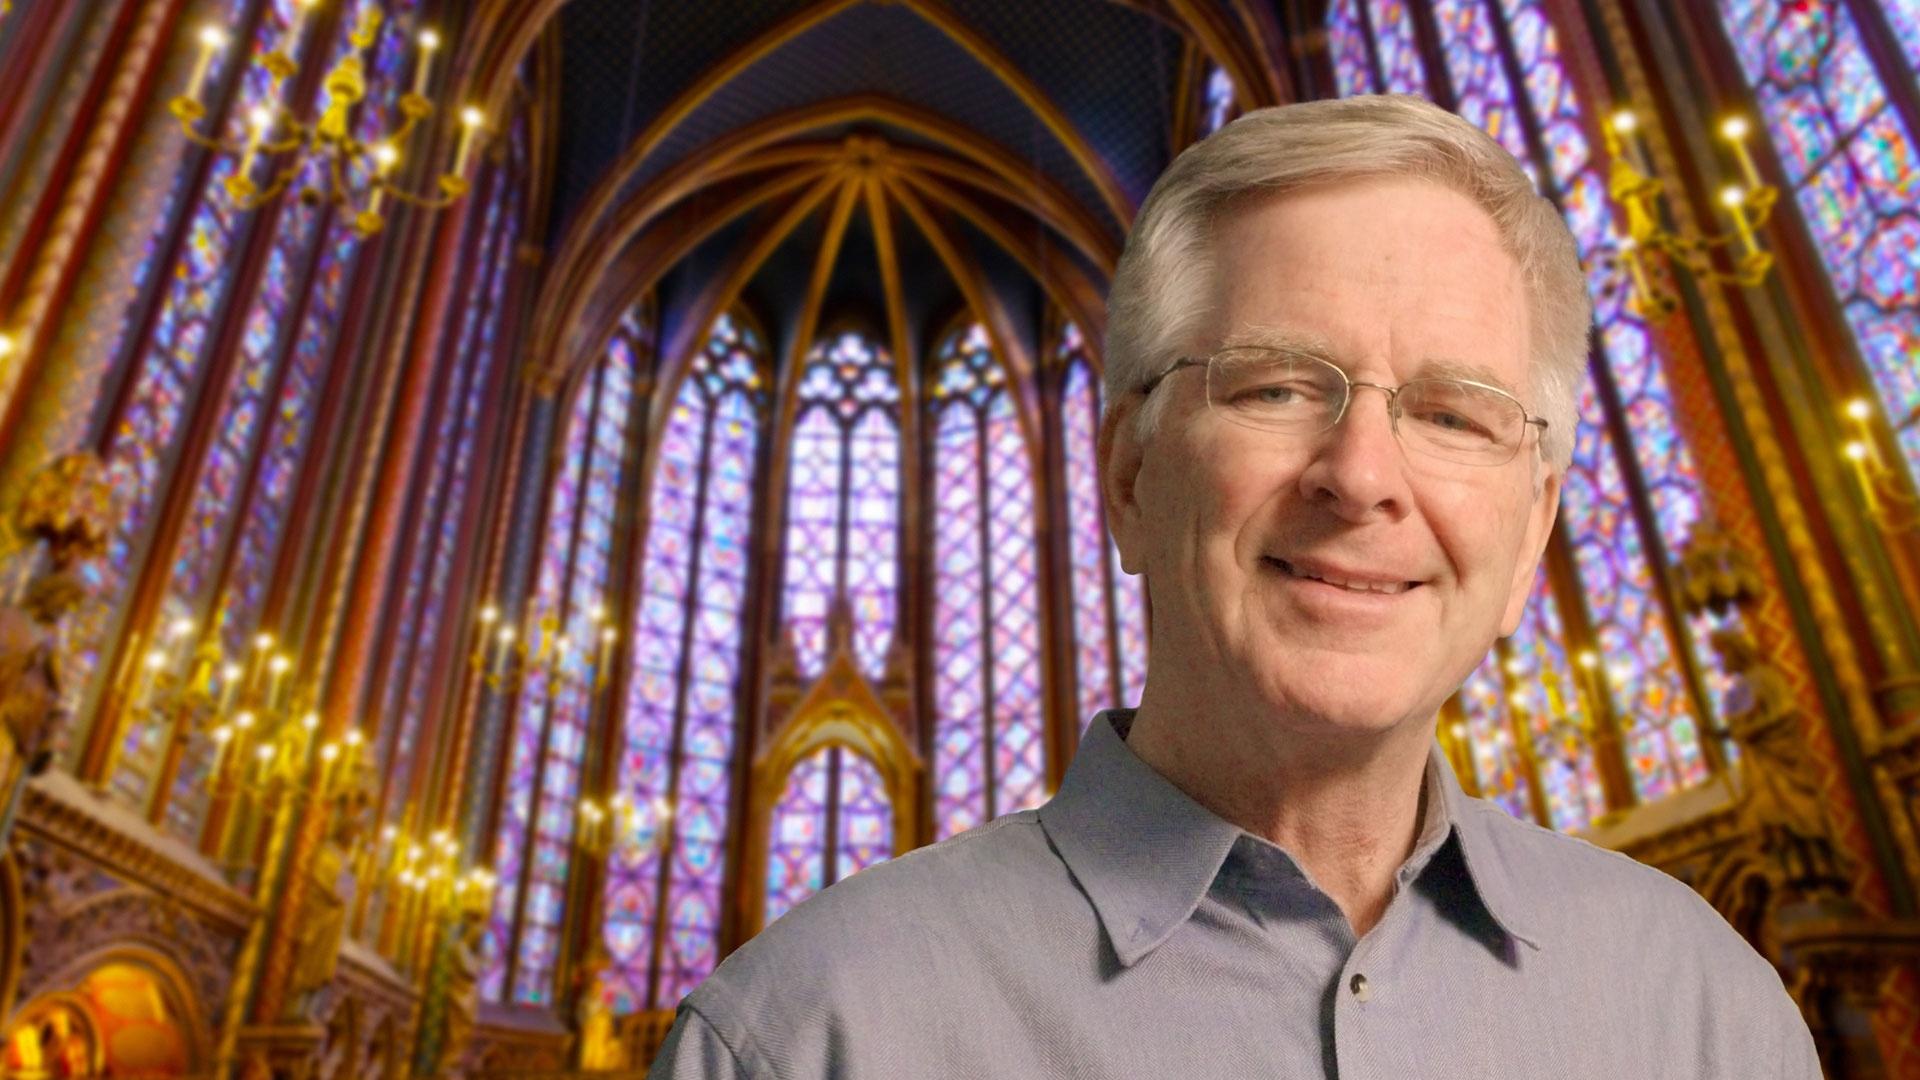 Rick Steves' Europe: Art of the High Middle Ages